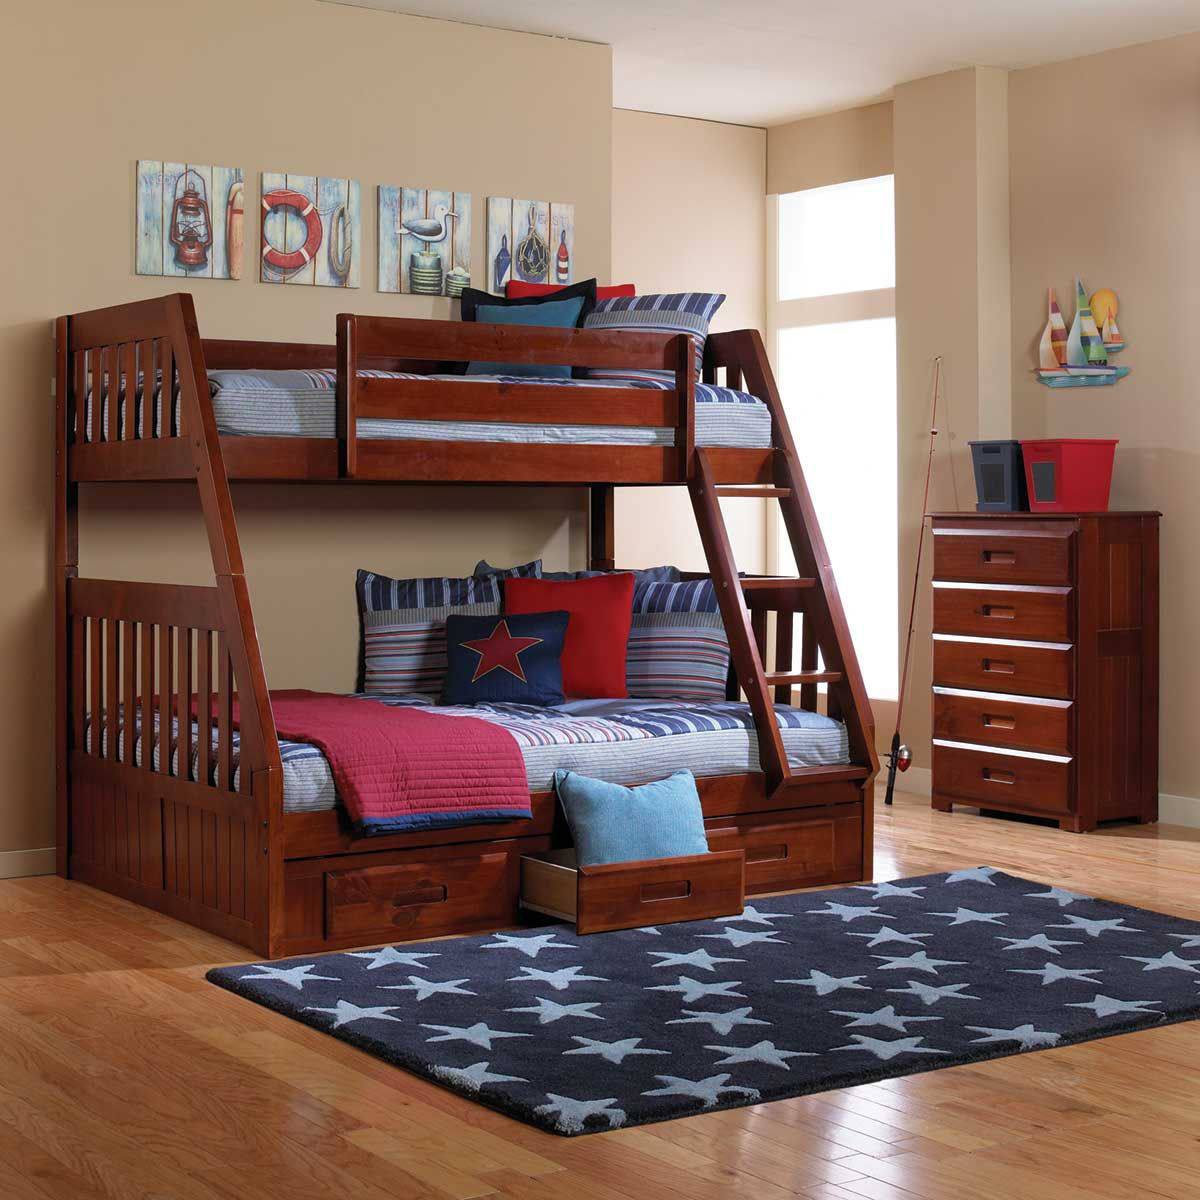 Forrester Twin Full Bunk Bed Bad, Twin Over Twin Bunk Beds With Storage